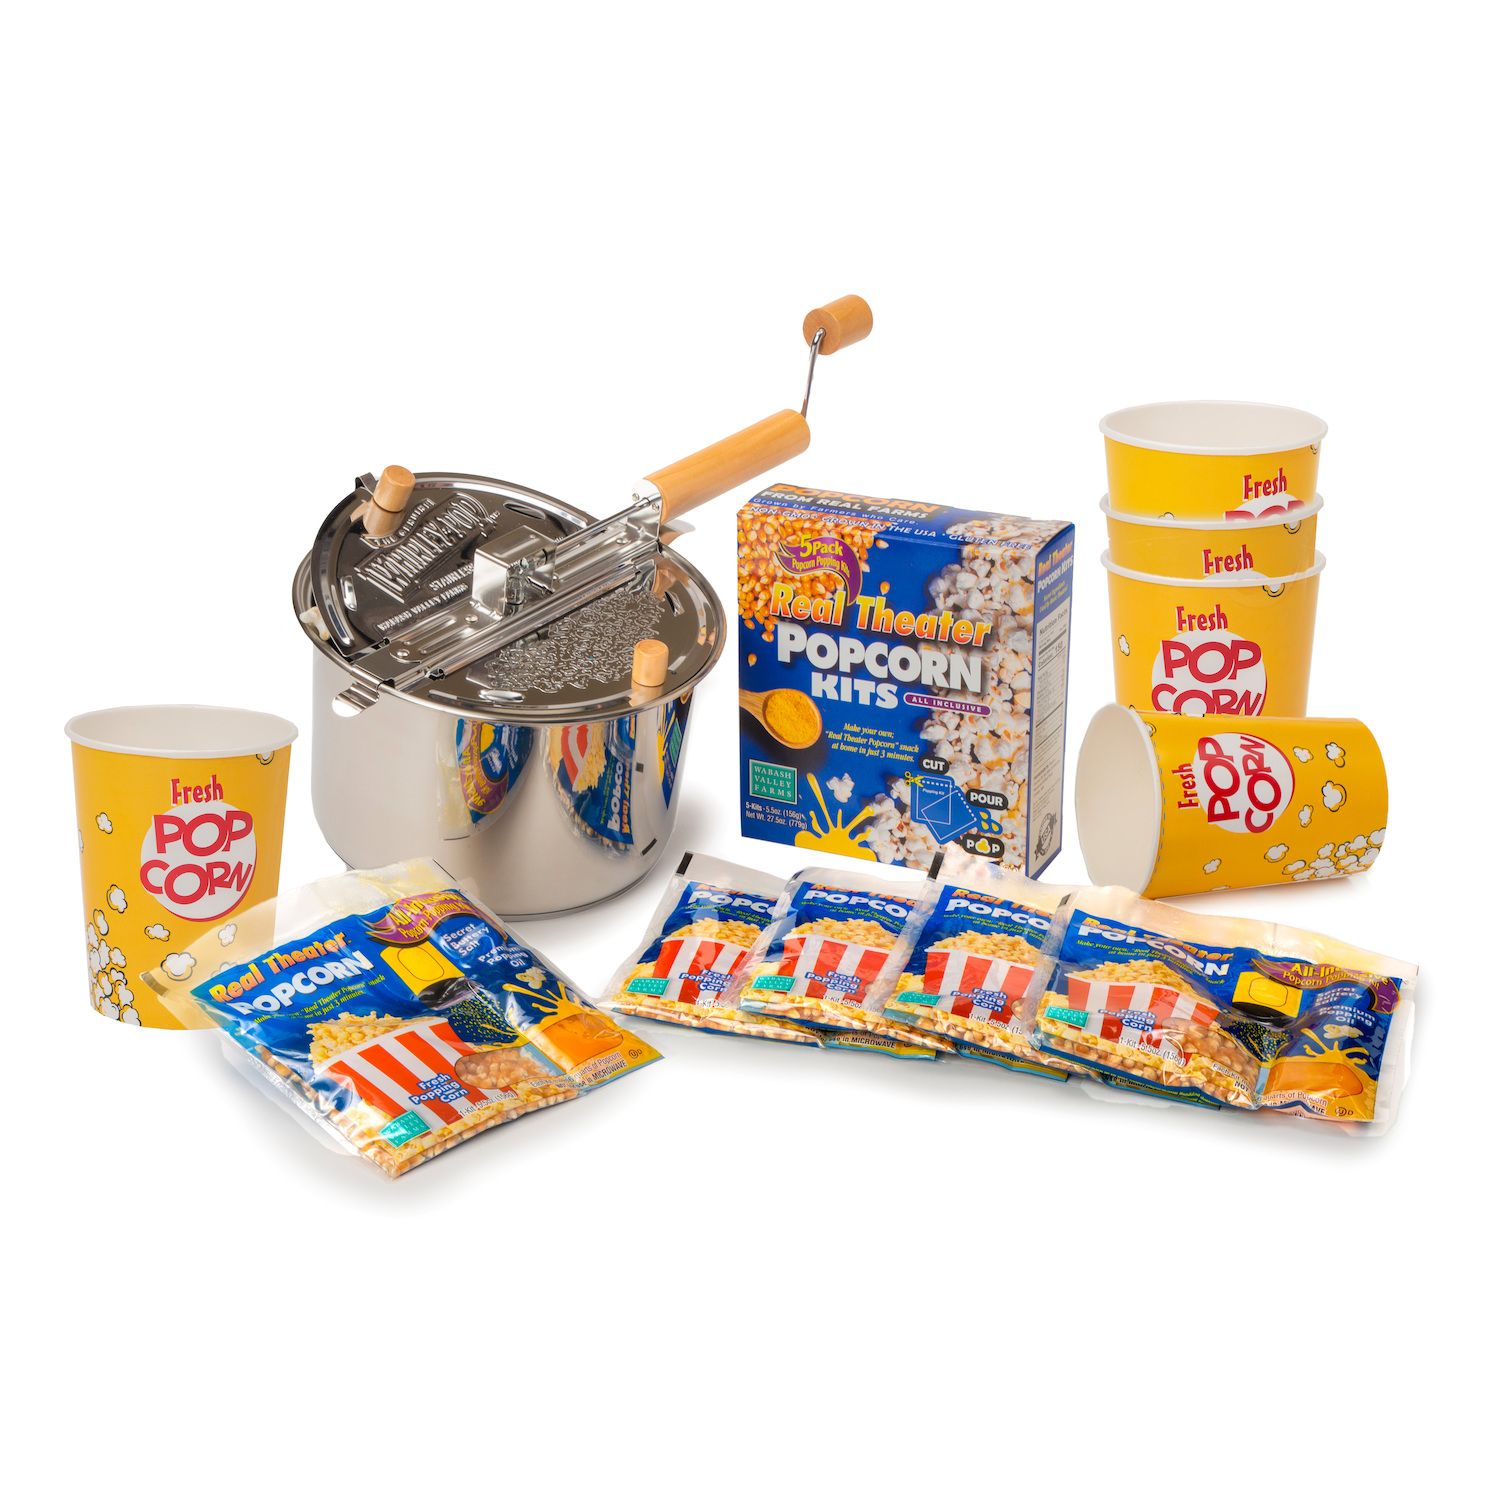 Whirley Pop Shop  Popcorn Popping Kits: Sample Pack